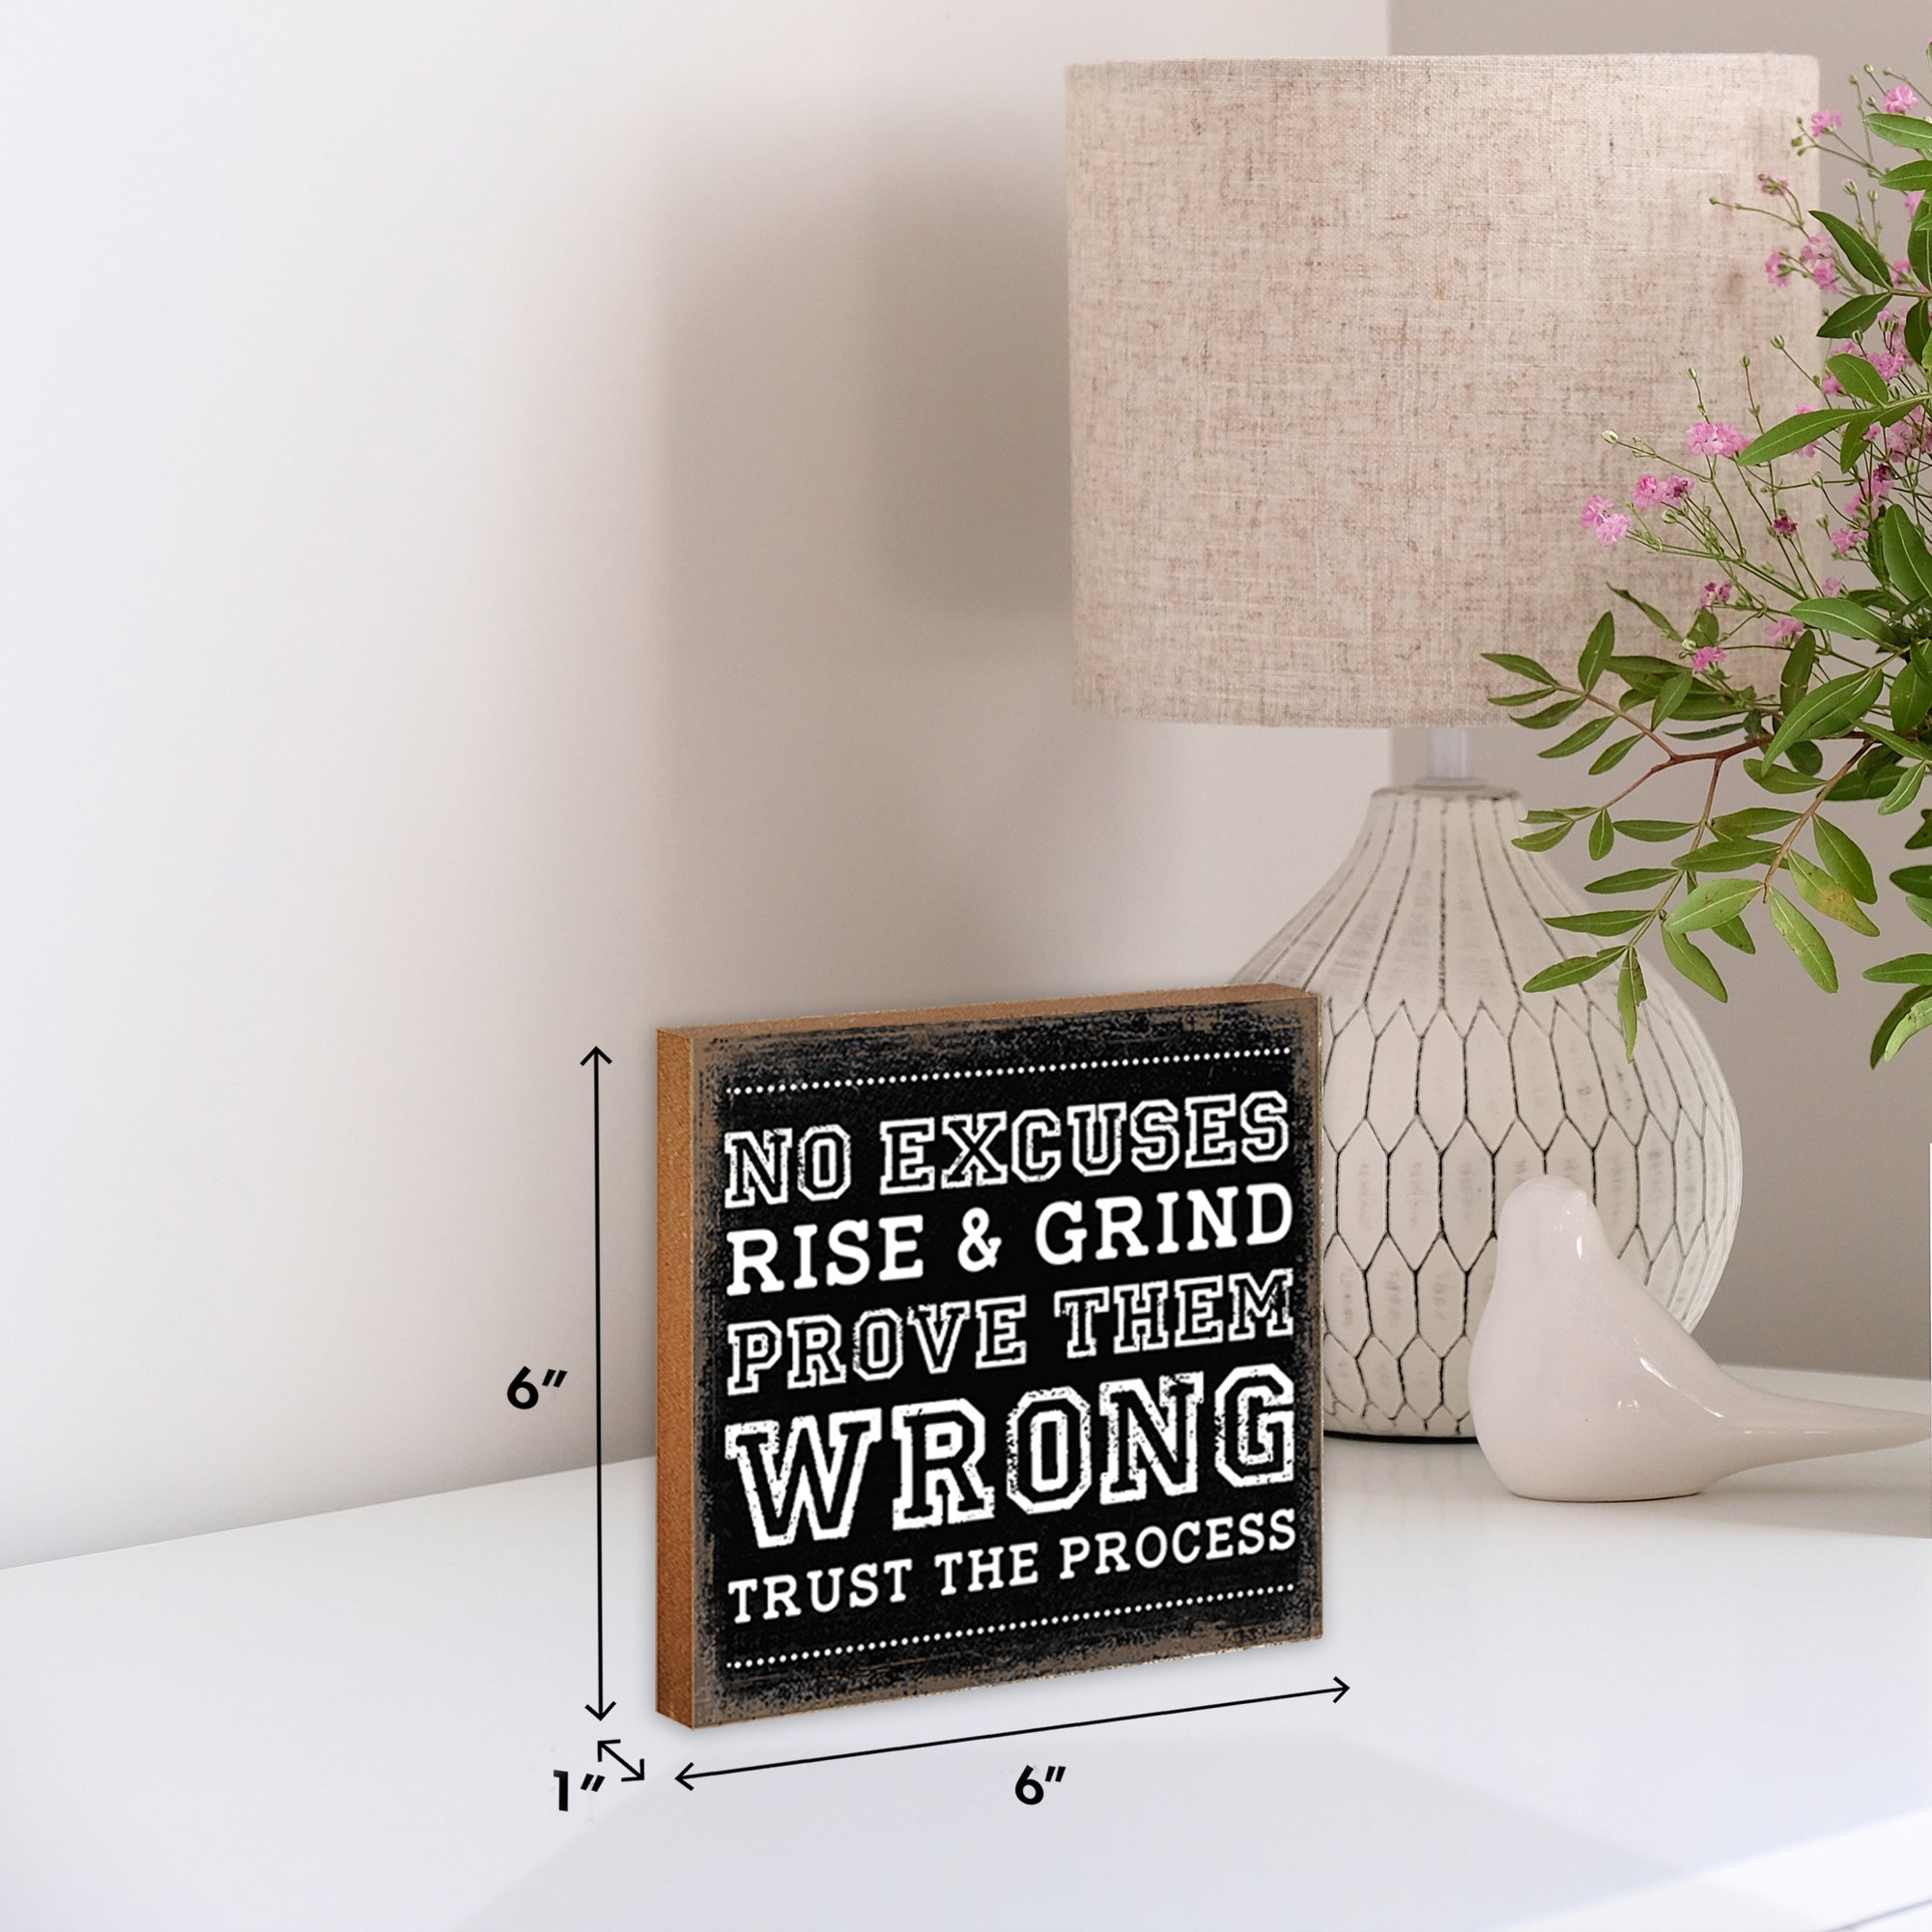 Inspirational Bible verses to uplift your spirit and add a touch of inspiration to your space.